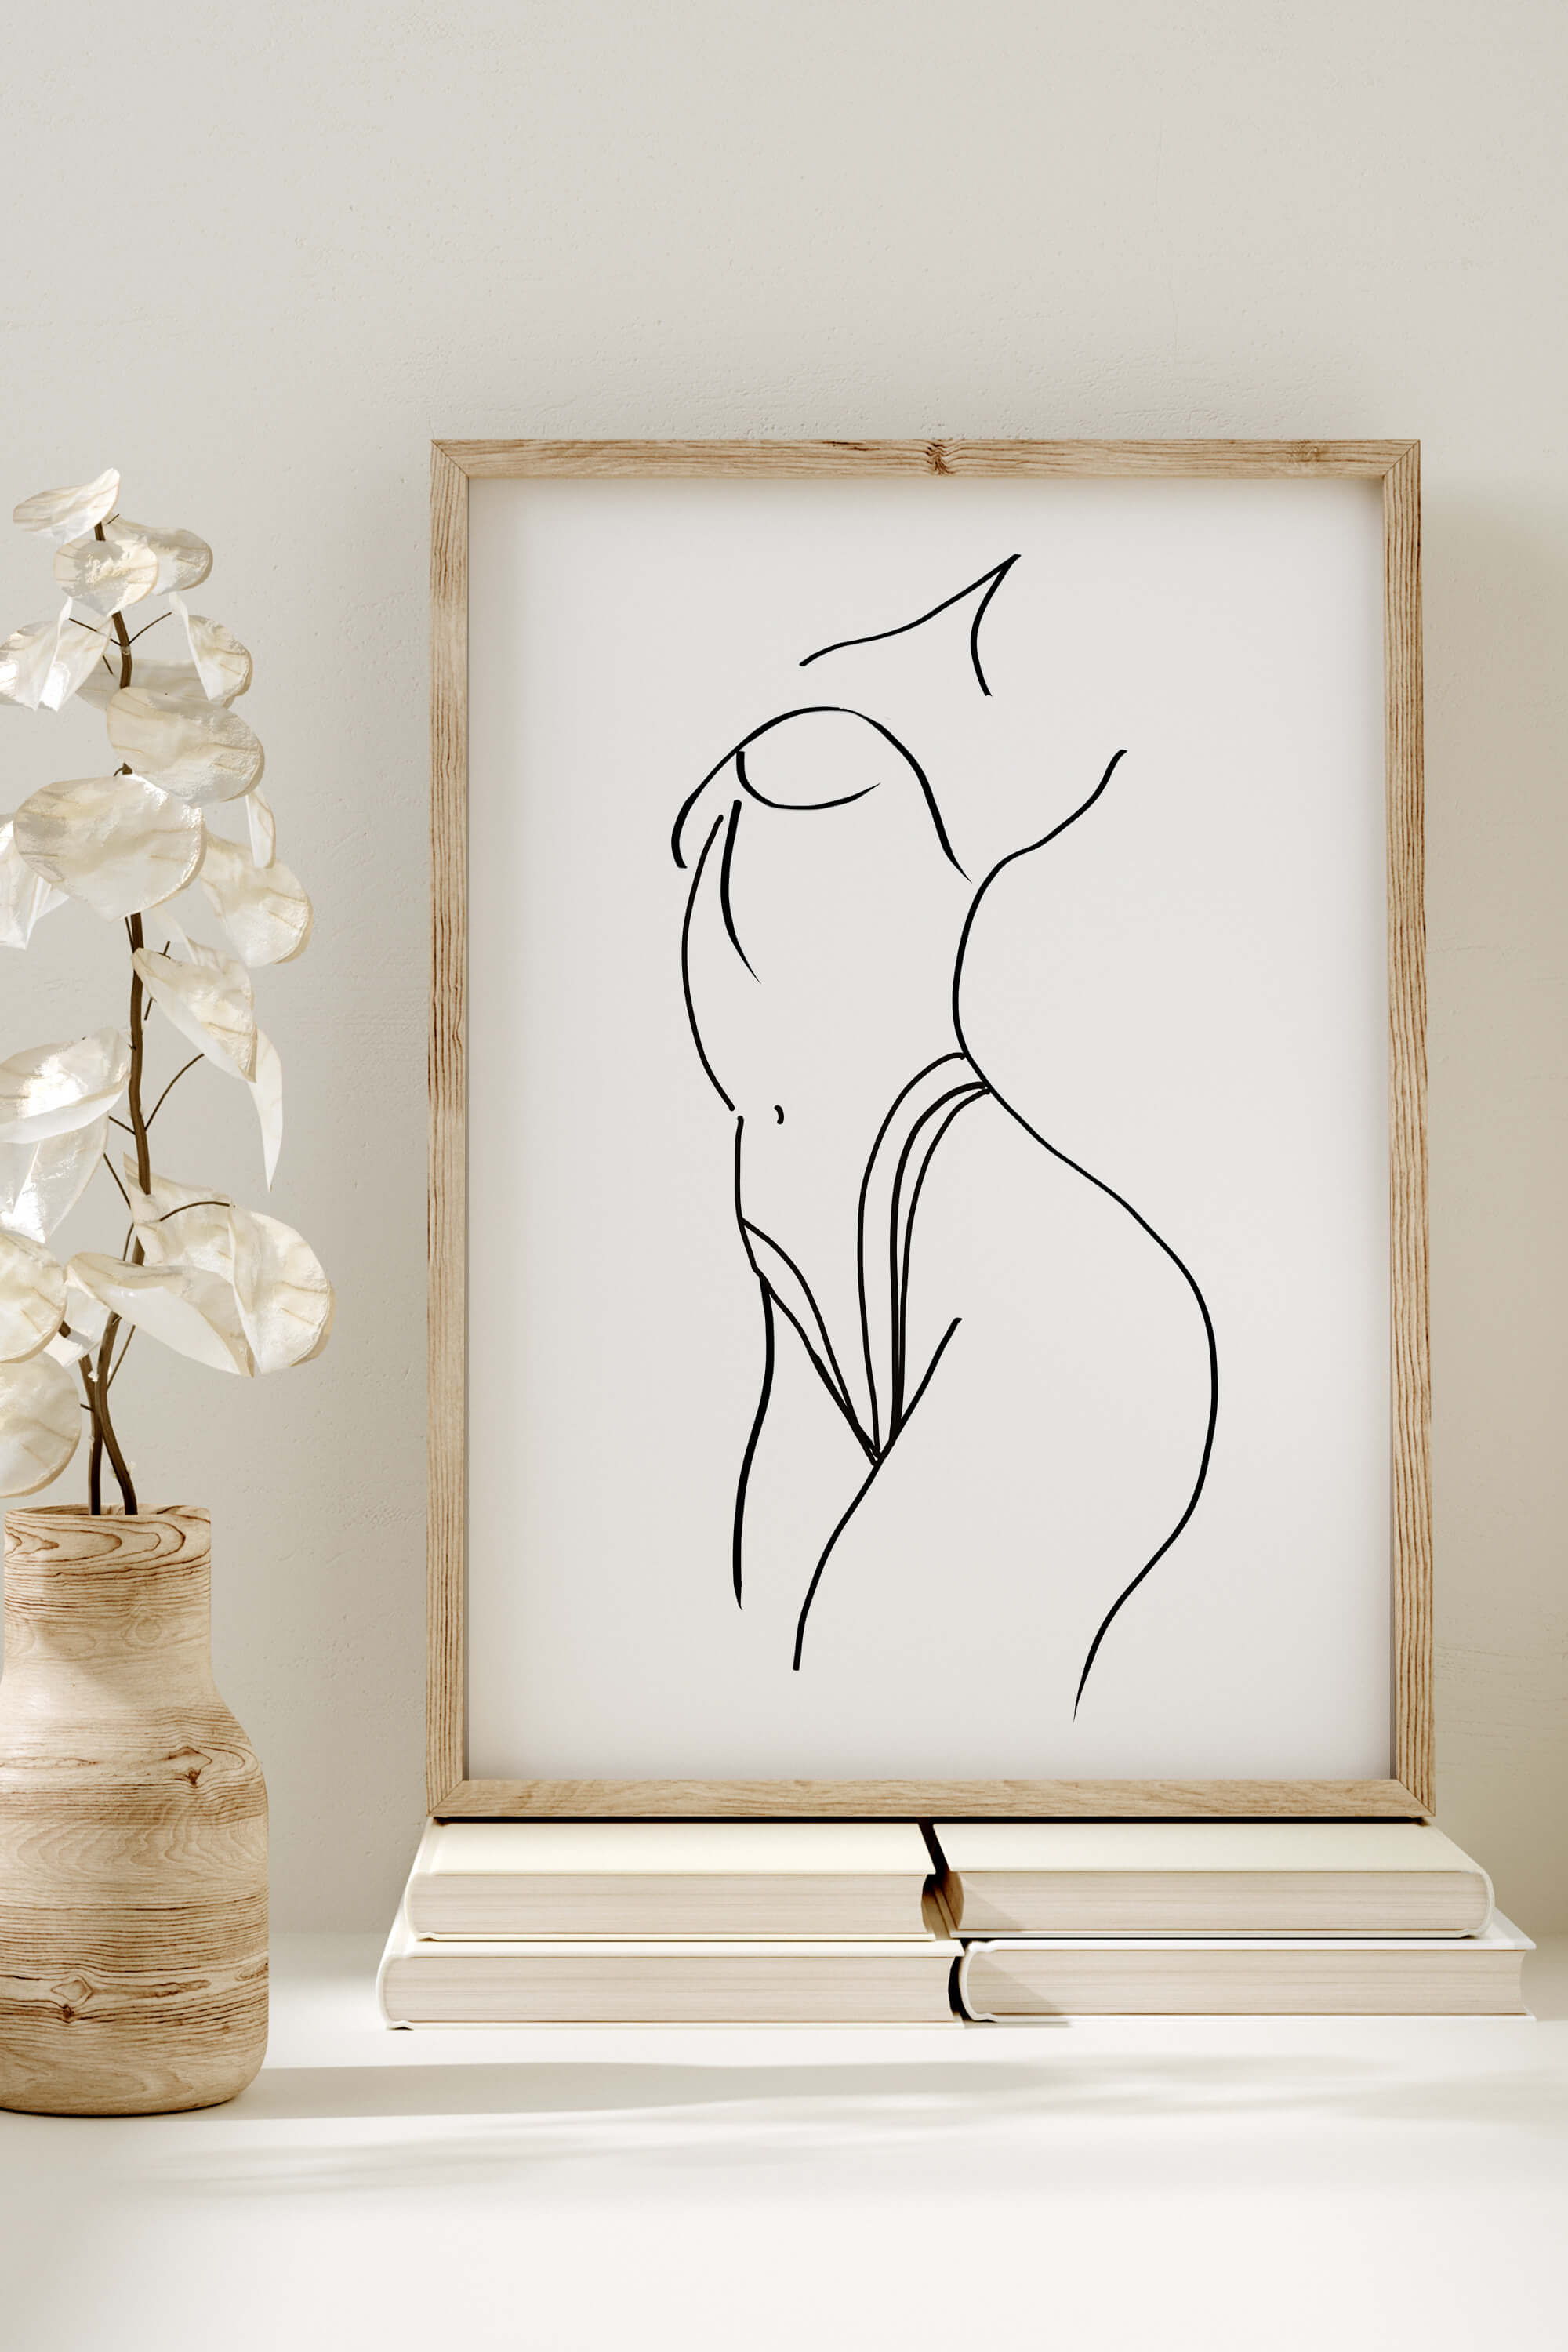 Captivating black and white art print showcasing a sensually drawn female form. The carefully selected lines evoke passion and desire, creating an intimate atmosphere. Ideal for those seeking art that ignites the senses.